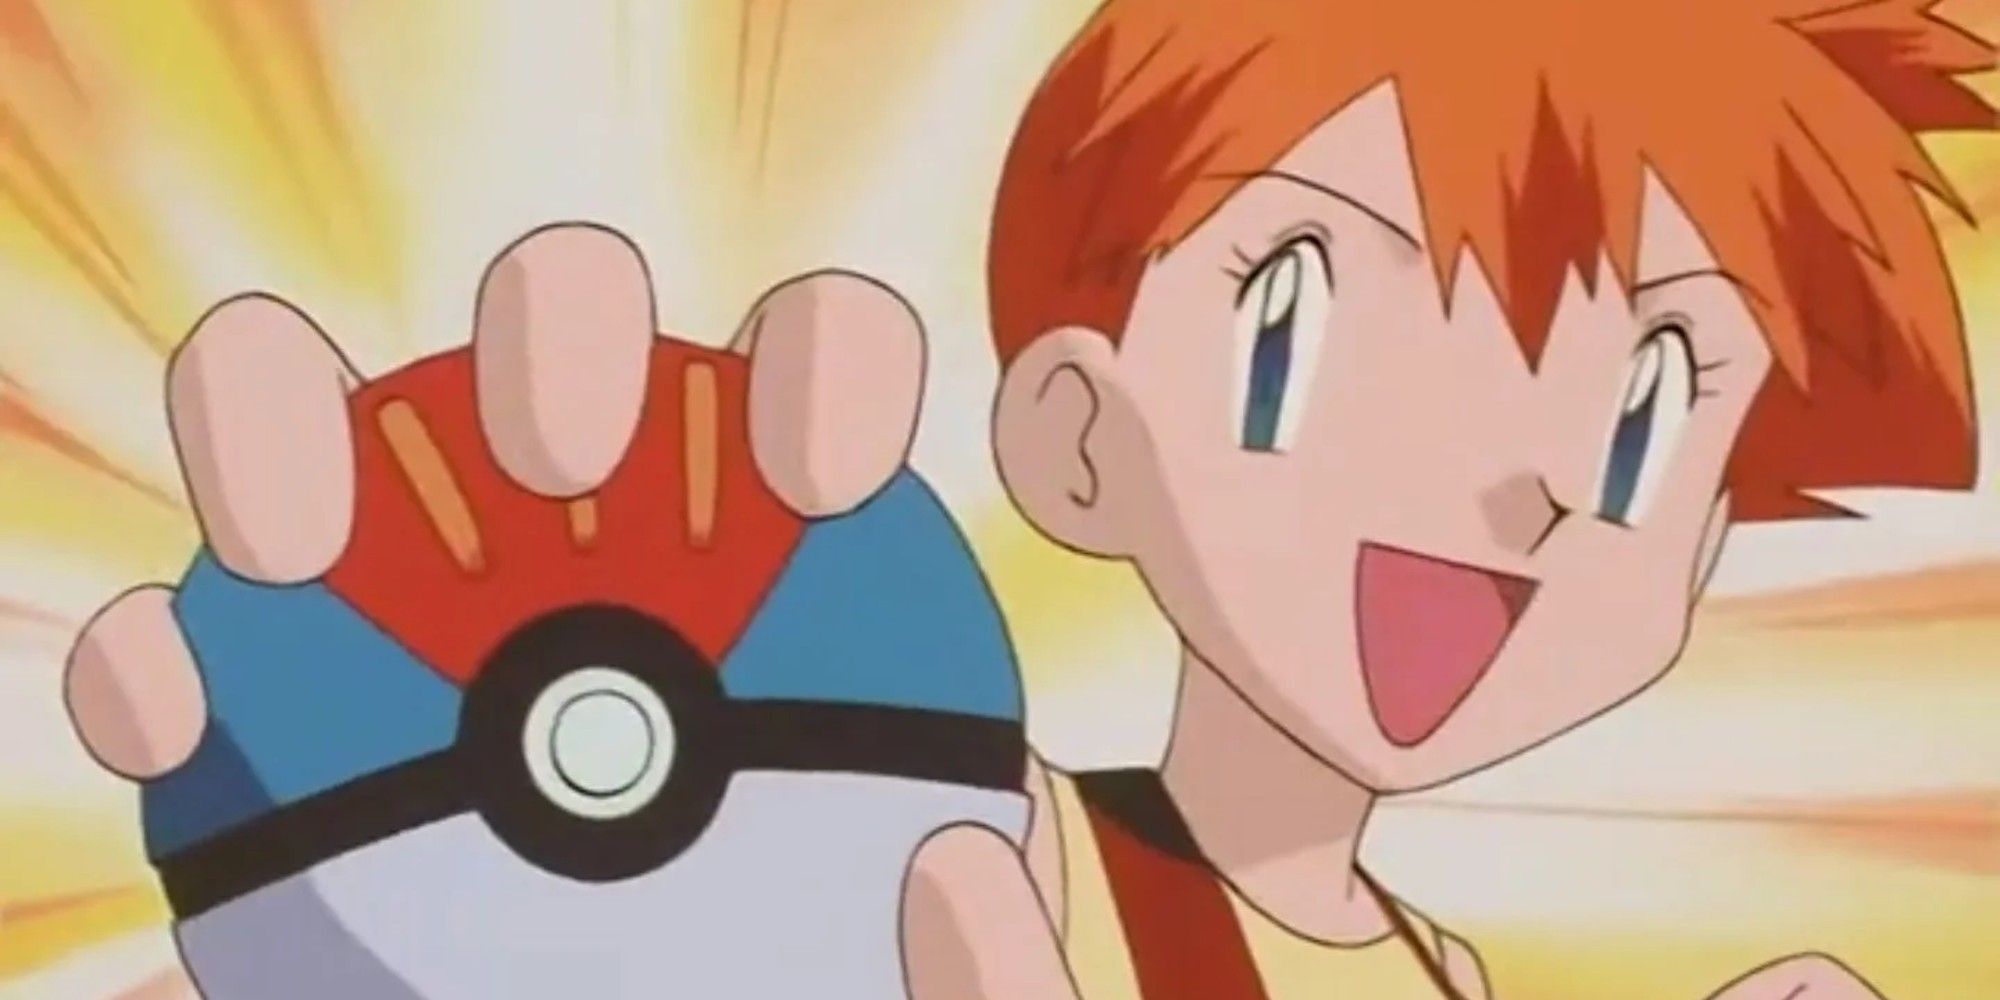 Misty from the Pokemon anime, holding a Lure Ball after capture